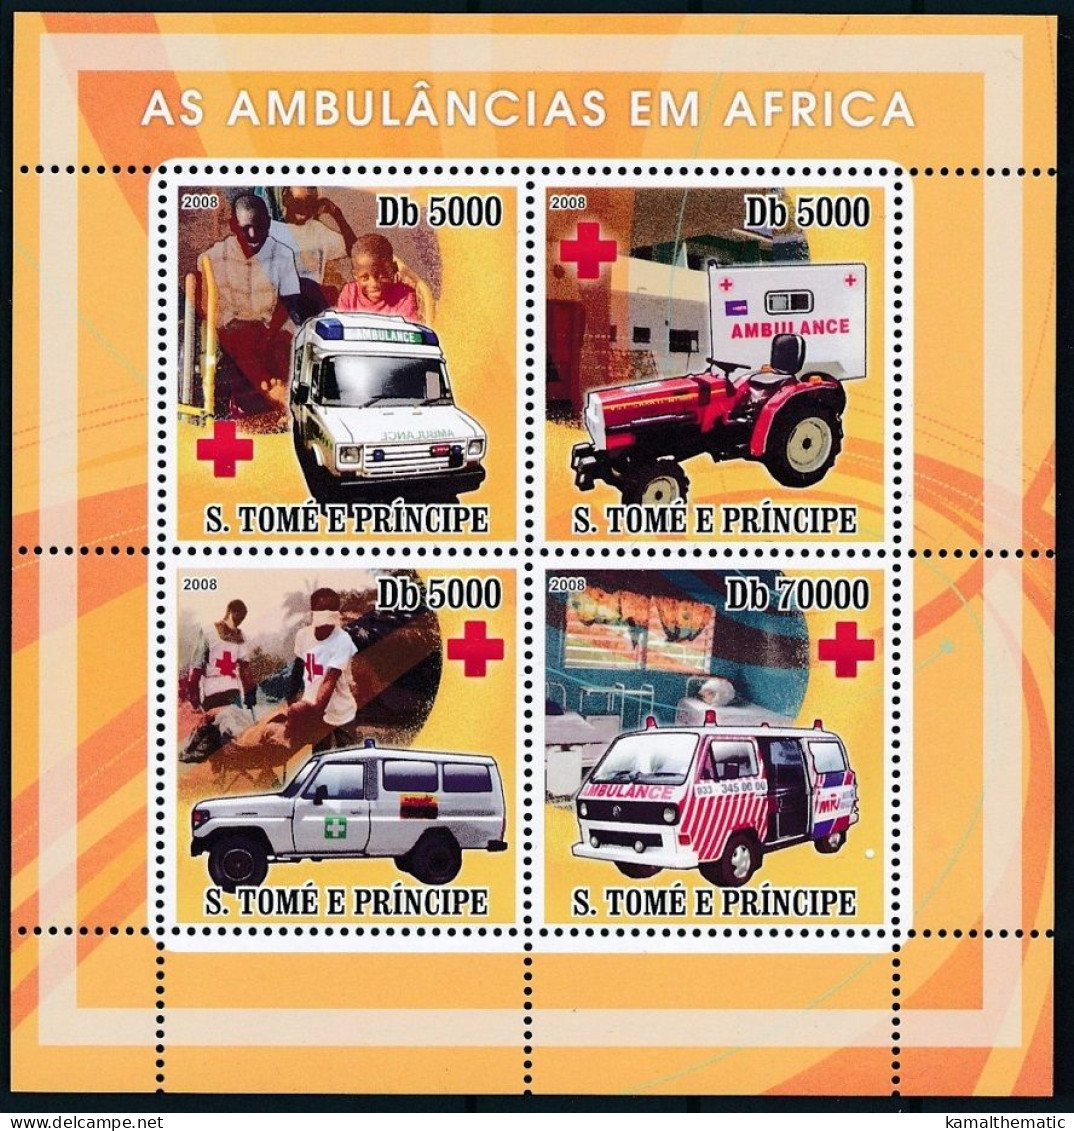 Sao Tome 2008 MNH 4v SS, Ambulance, Africa, Red Cross, Tractor, Medical Transport - First Aid